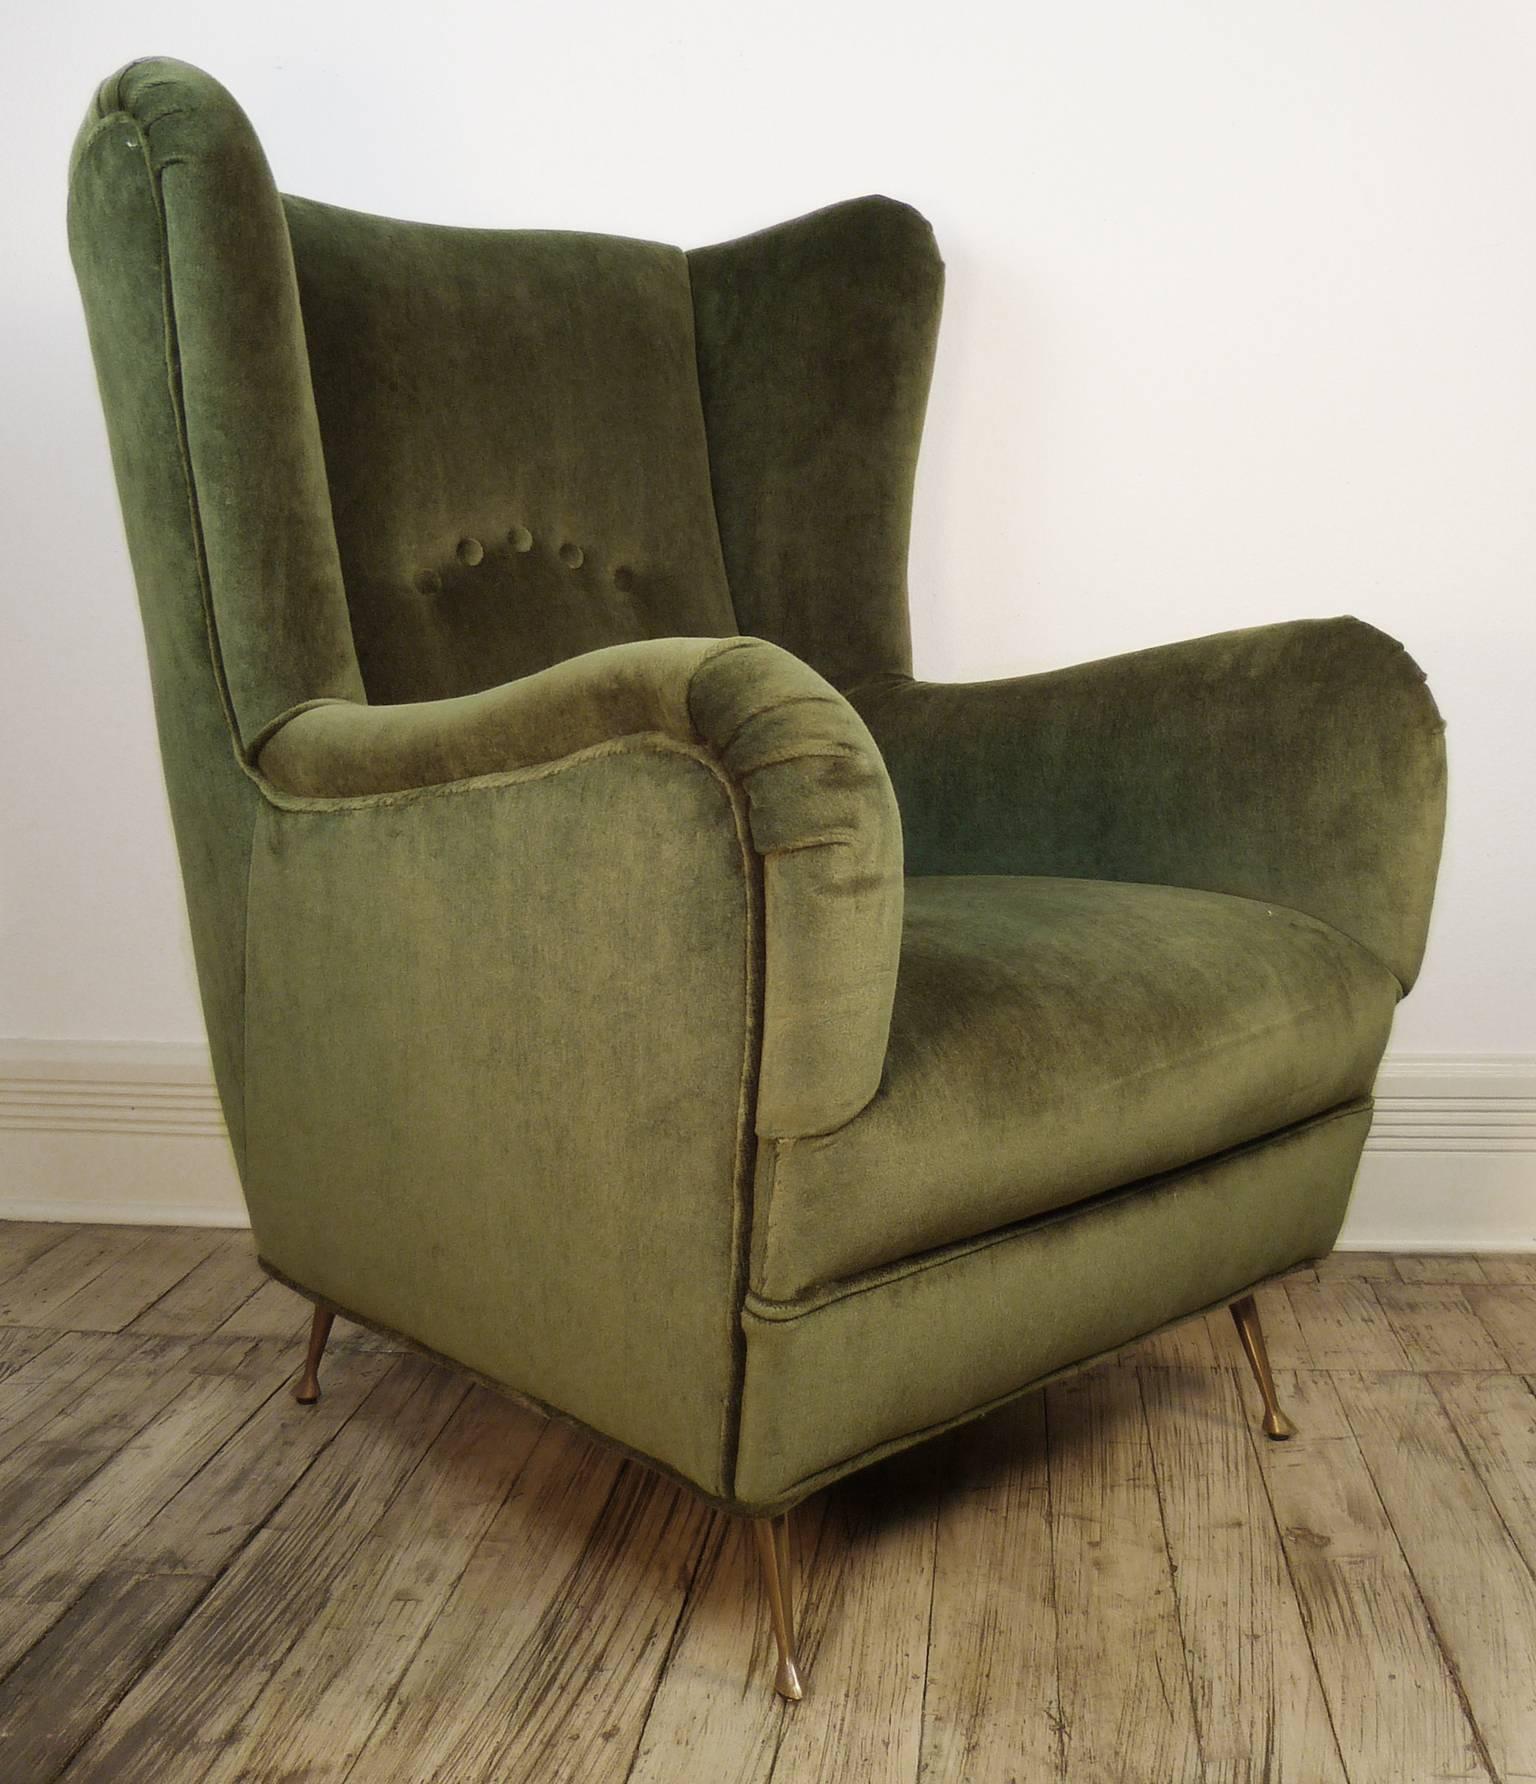 A beautiful pair of oversized vintage wingback chairs, newly reupholstered in rich green mohair, with completely original brass legs. 